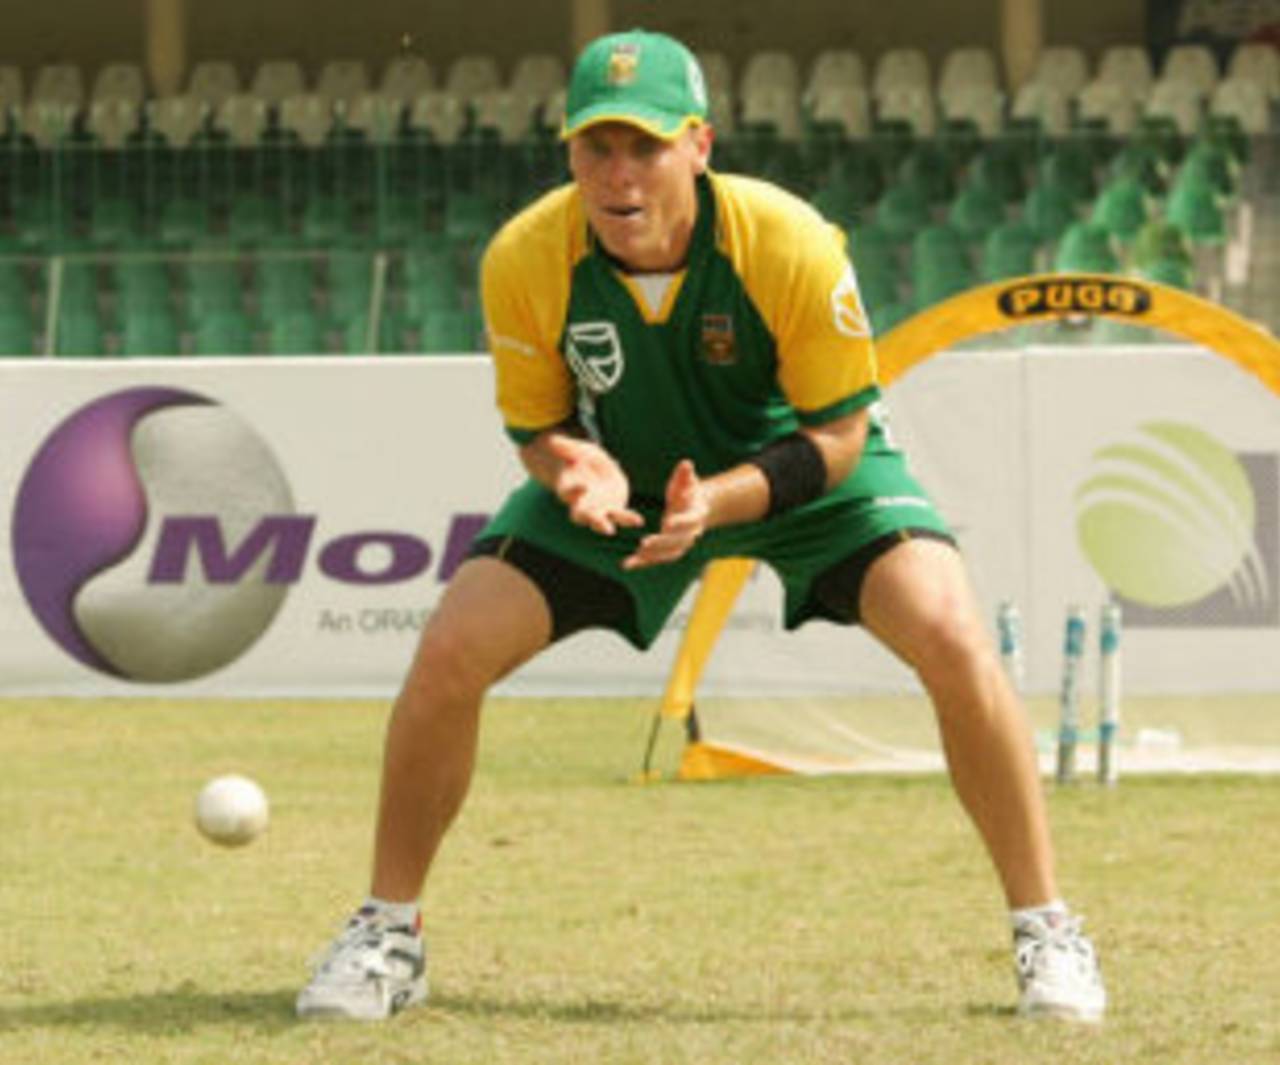 Johan Botha is completely focused during catching practice, Lahore, October 15, 2007 